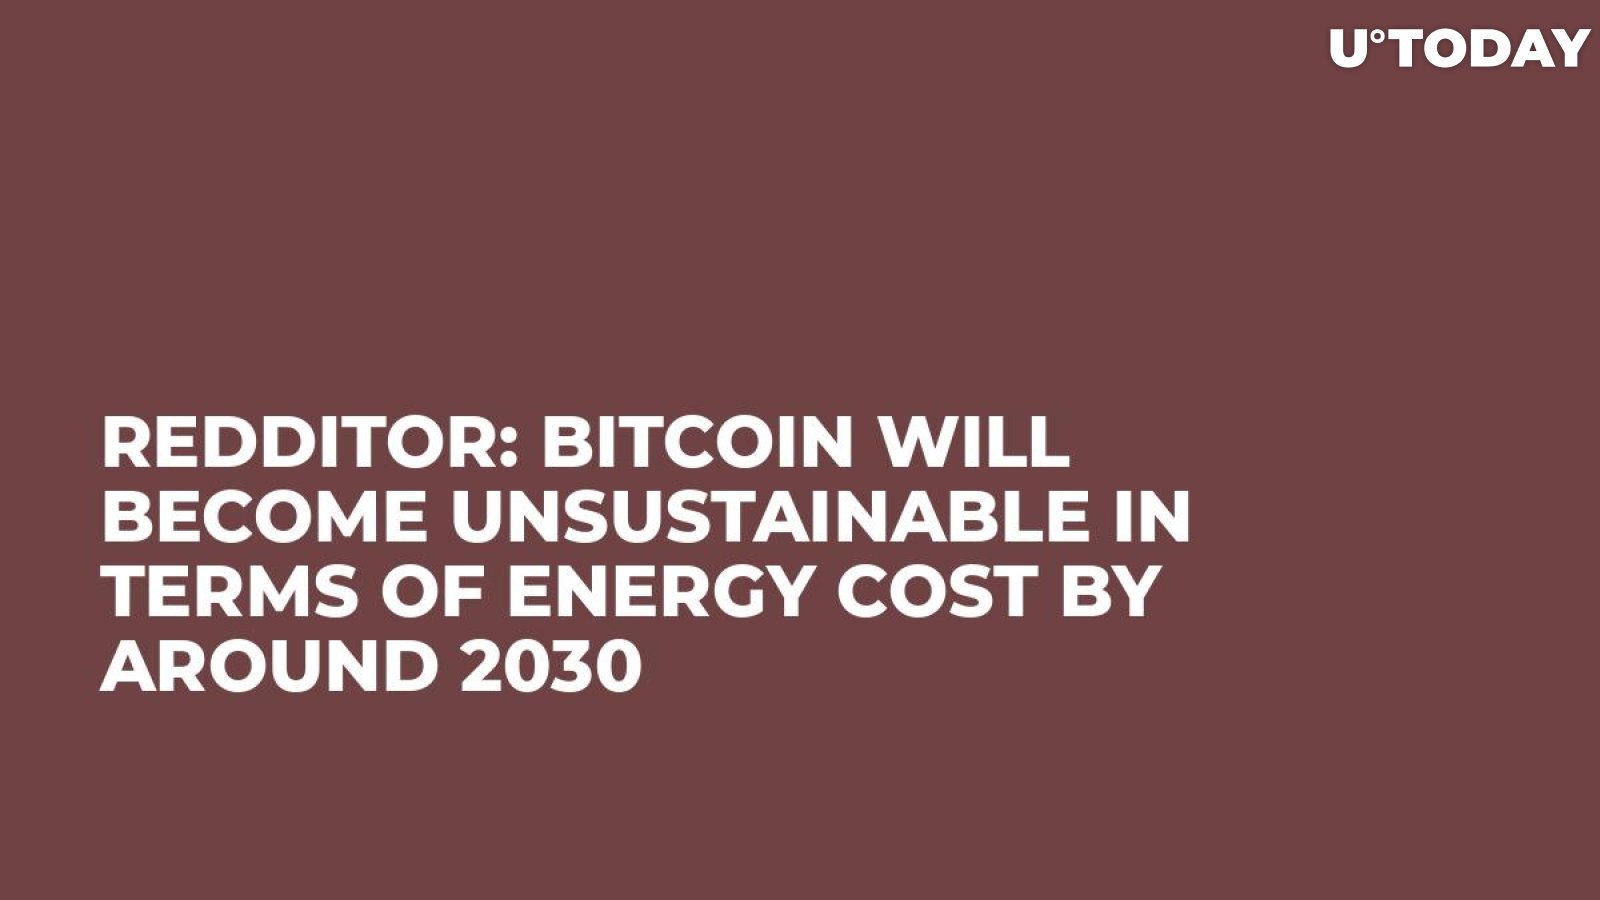 Redditor: Bitcoin Will Become Unsustainable in Terms of Energy Cost by Around 2030